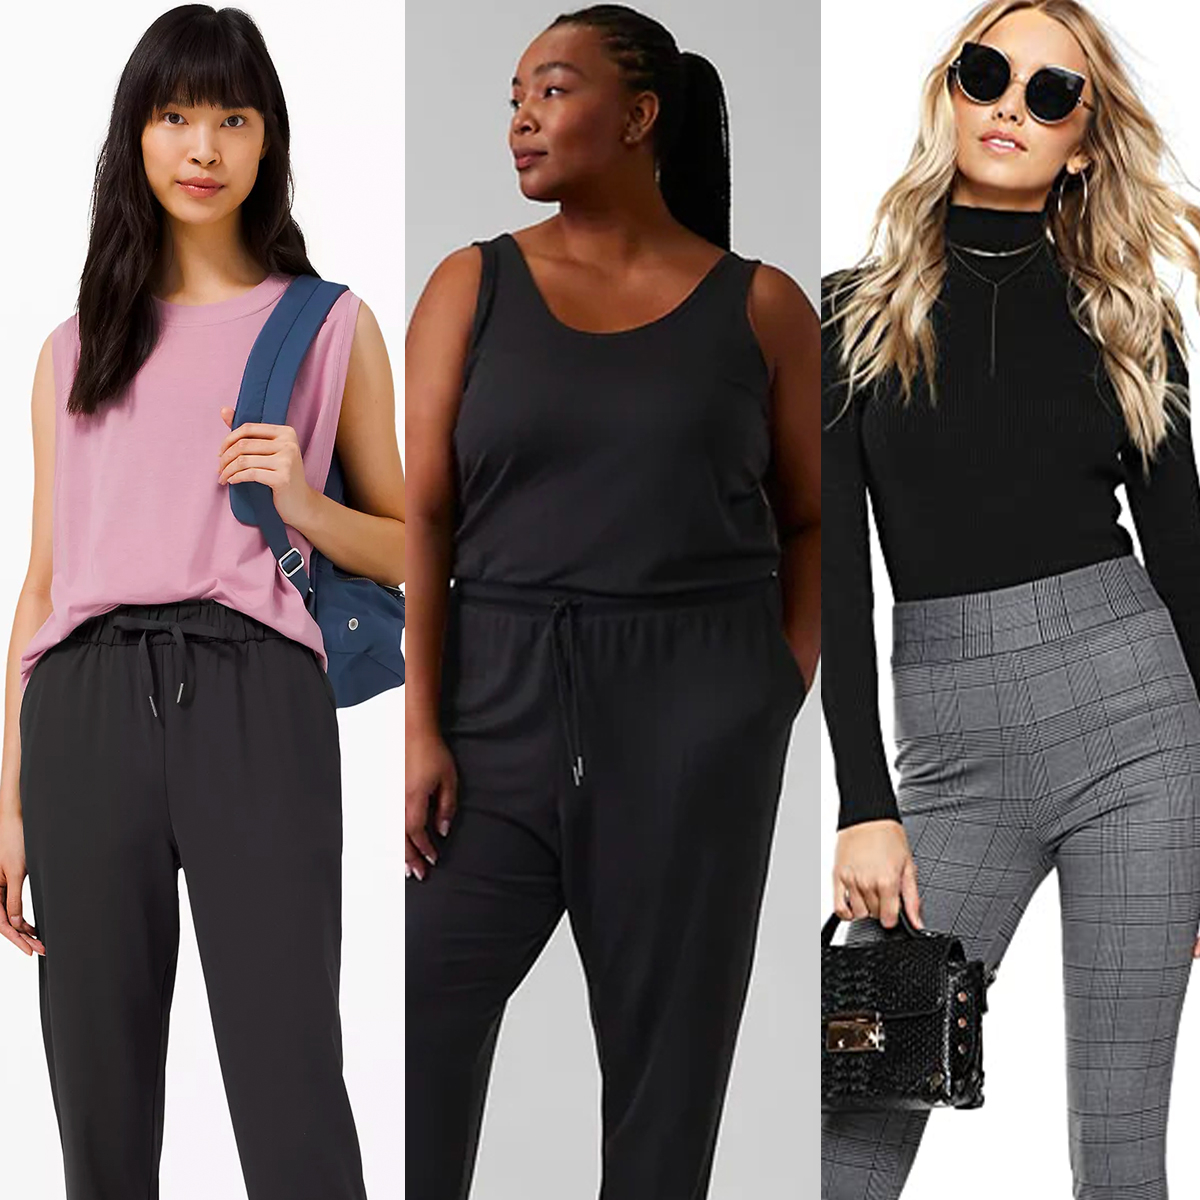 These Wardrobe Staples Will Take You From the Office to Gym in No Time